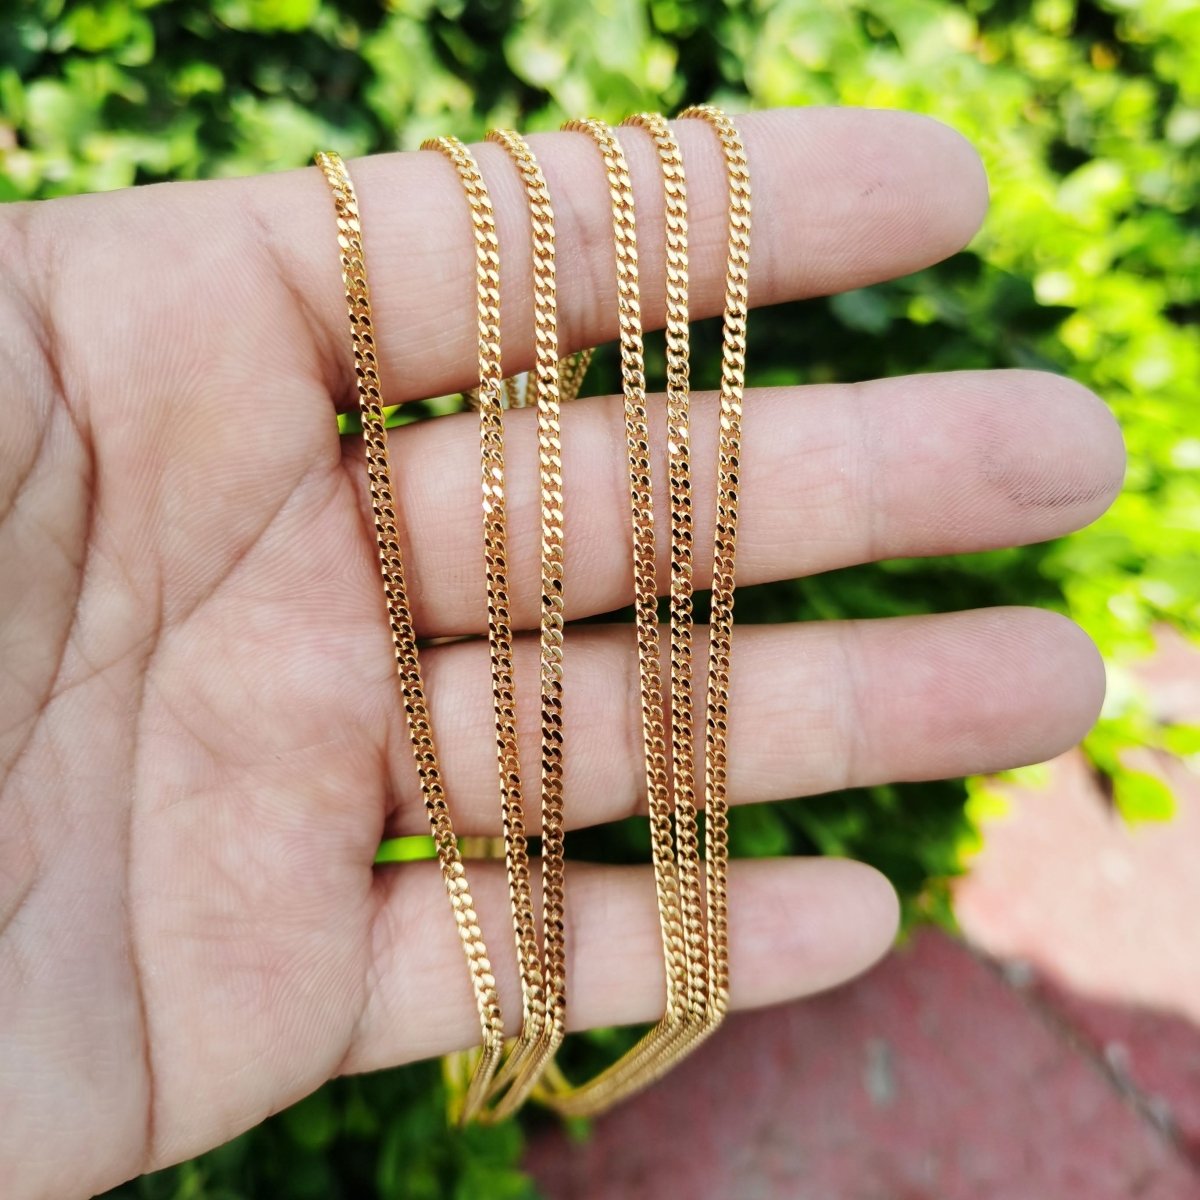 24K Gold Filled Necklace, Curb Necklace, Gold Curb Chain Layering Necklace 2.2mm, 13.8 Inch Ready To Wear Curb Necklace w/ Lobster Clasps | CN-869 Clearance Pricing - DLUXCA